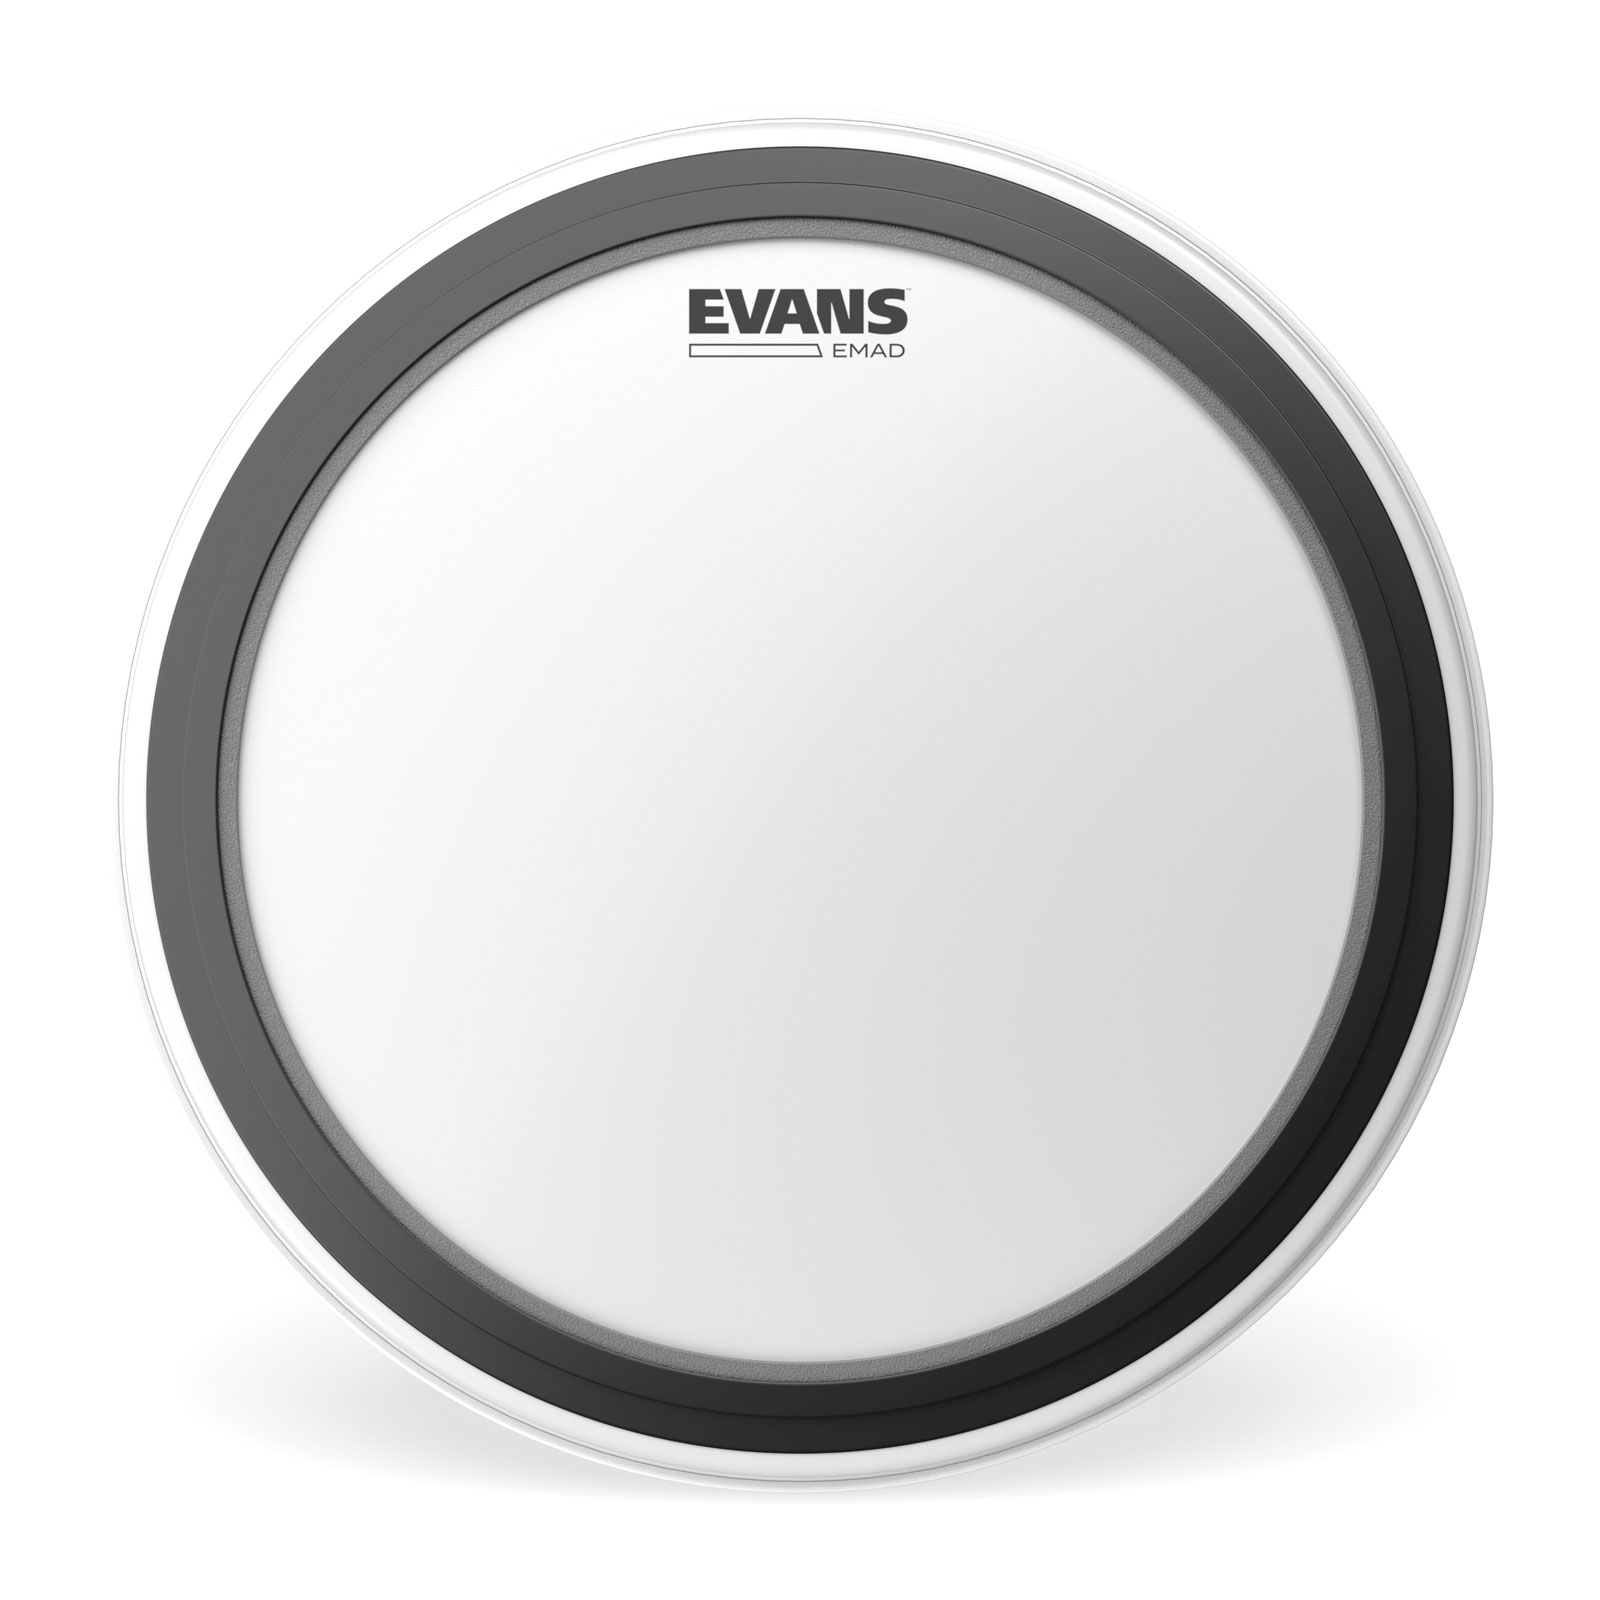 EVANS BD22EMADCW - PEAU EMAD COATED SABLEE 22